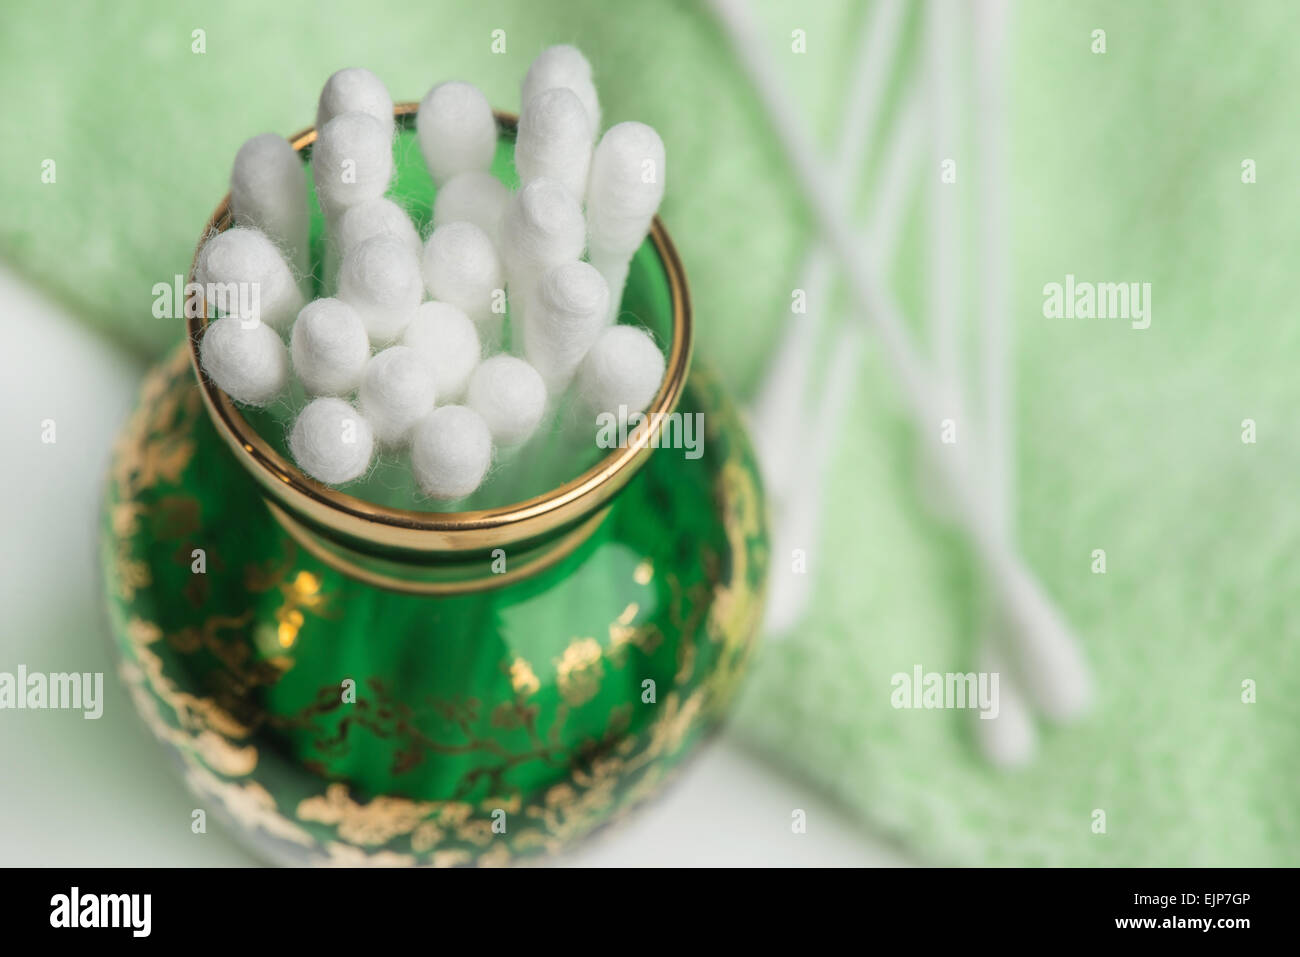 Cotton ear stick or coli in a green glass vase Stock Photo